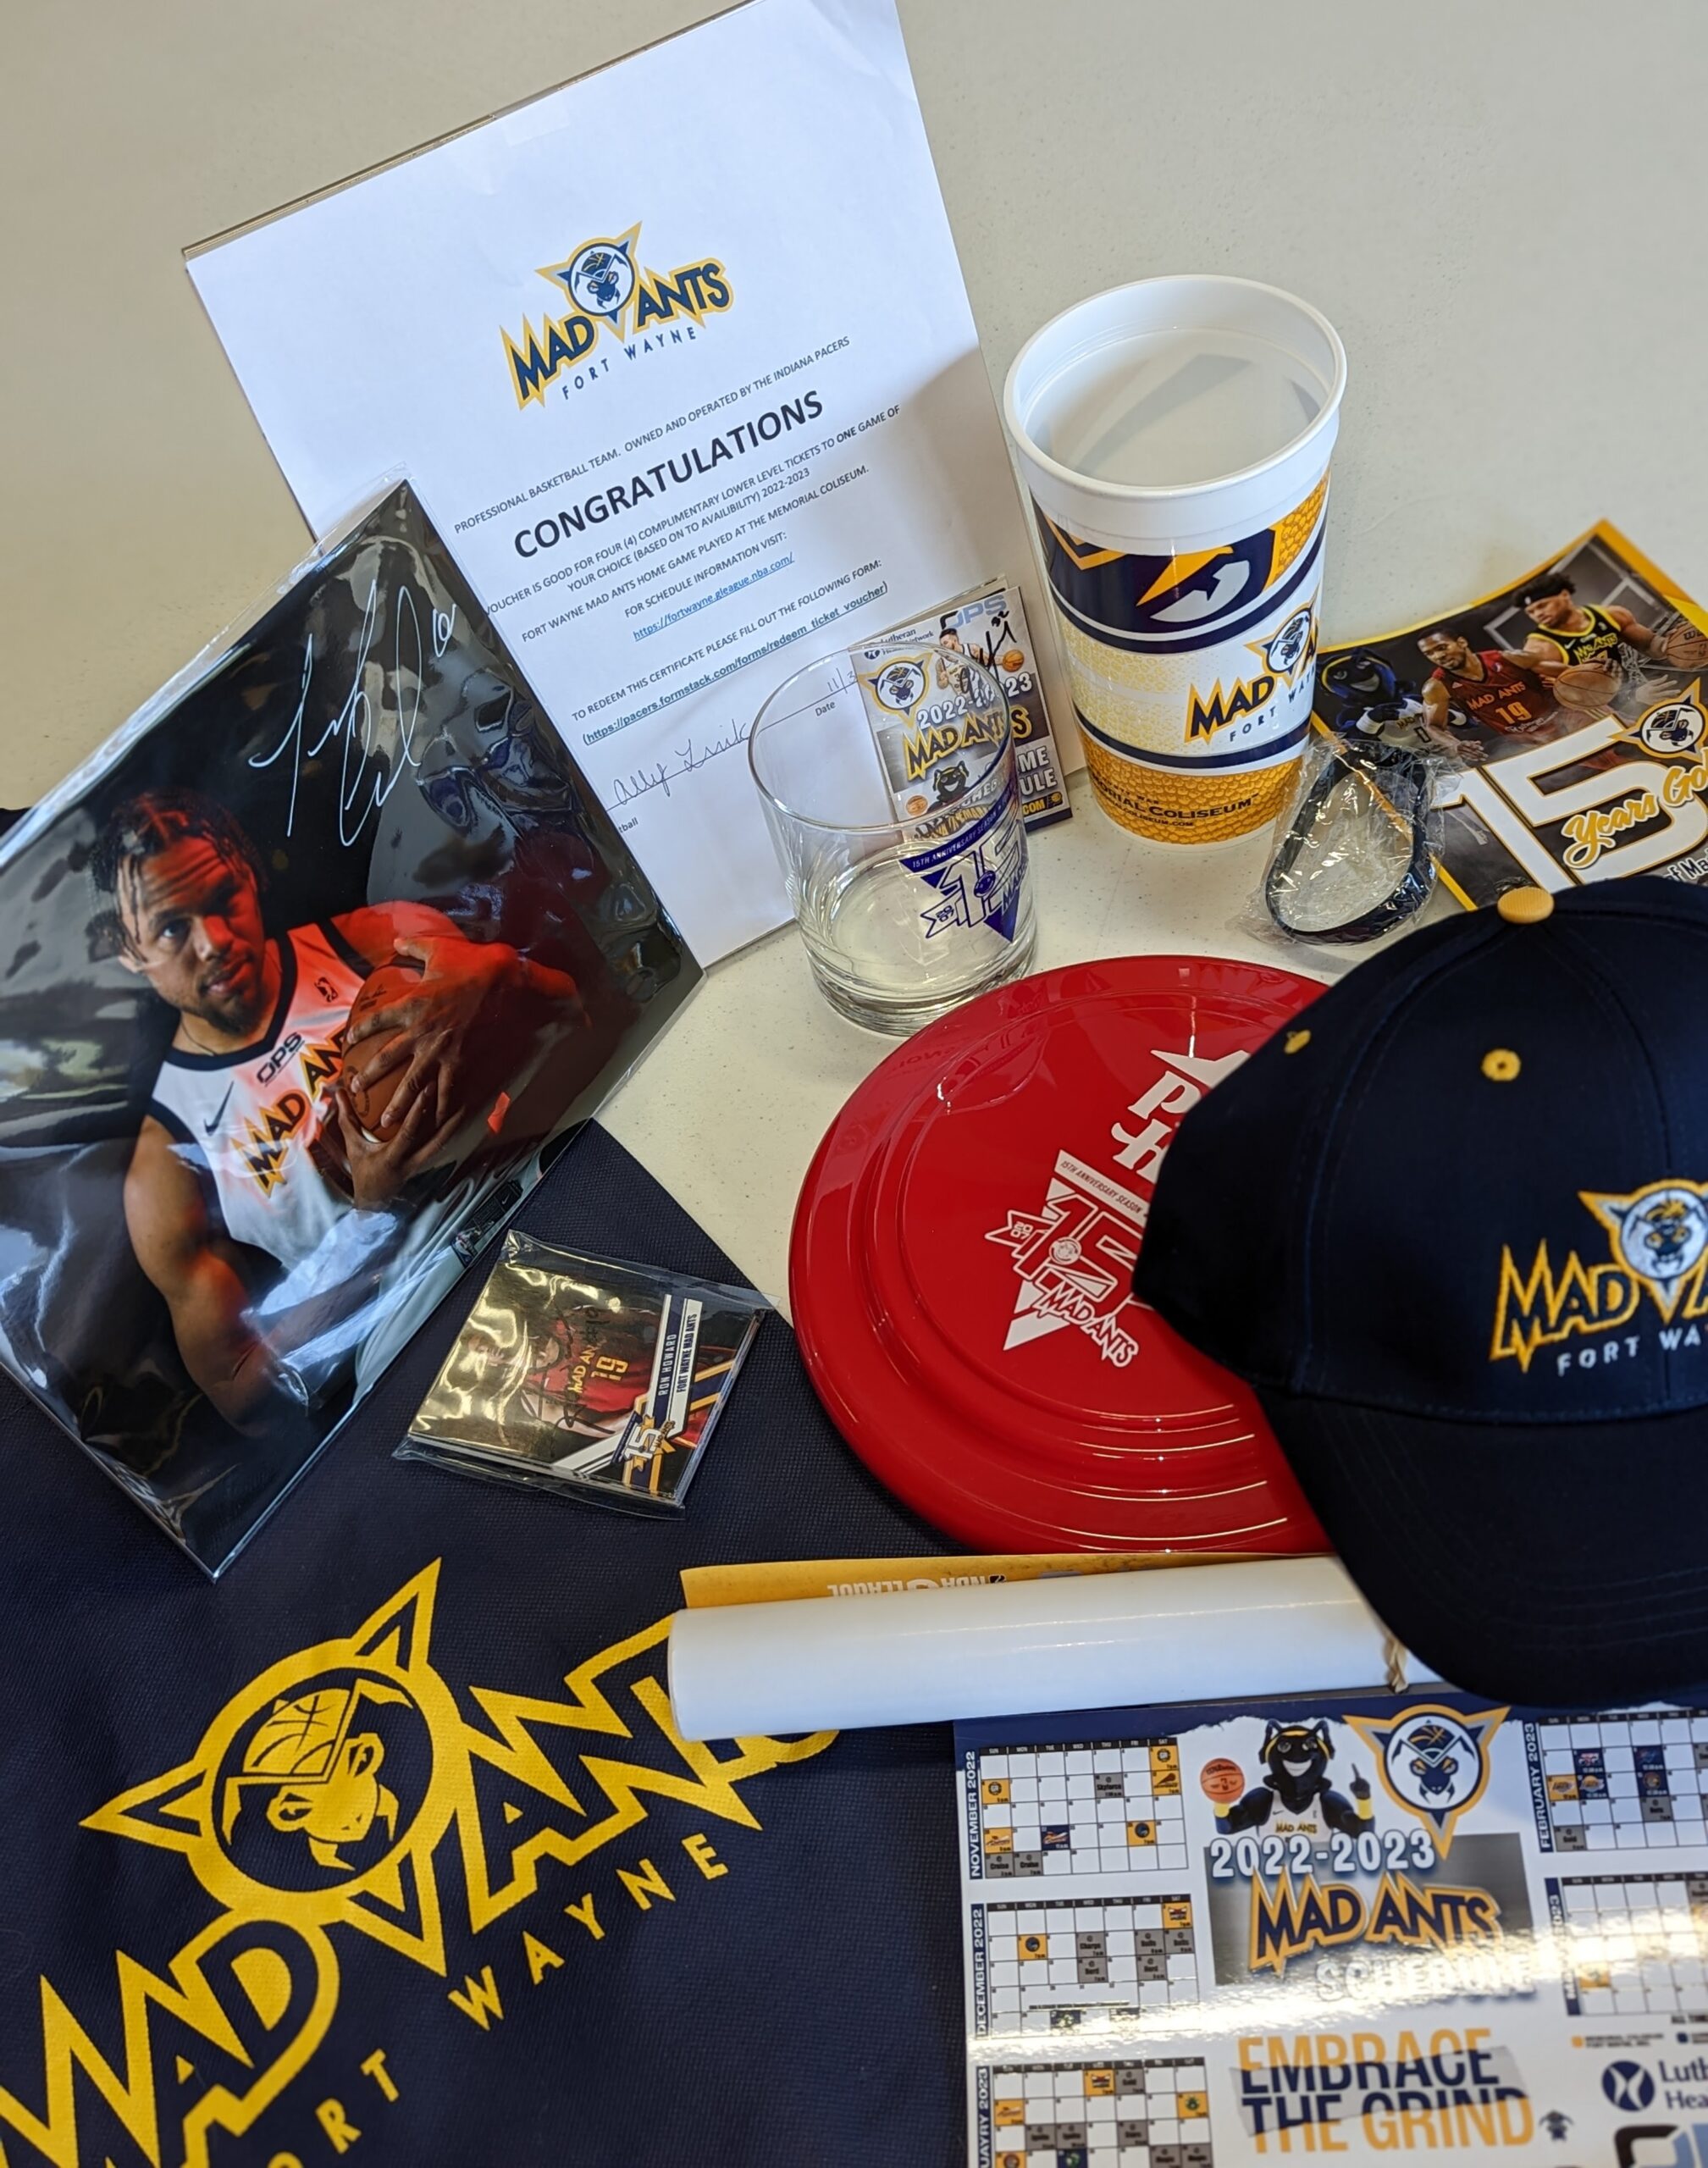 Mad Ants Tickets and Gear Resurrection Lutheran Church